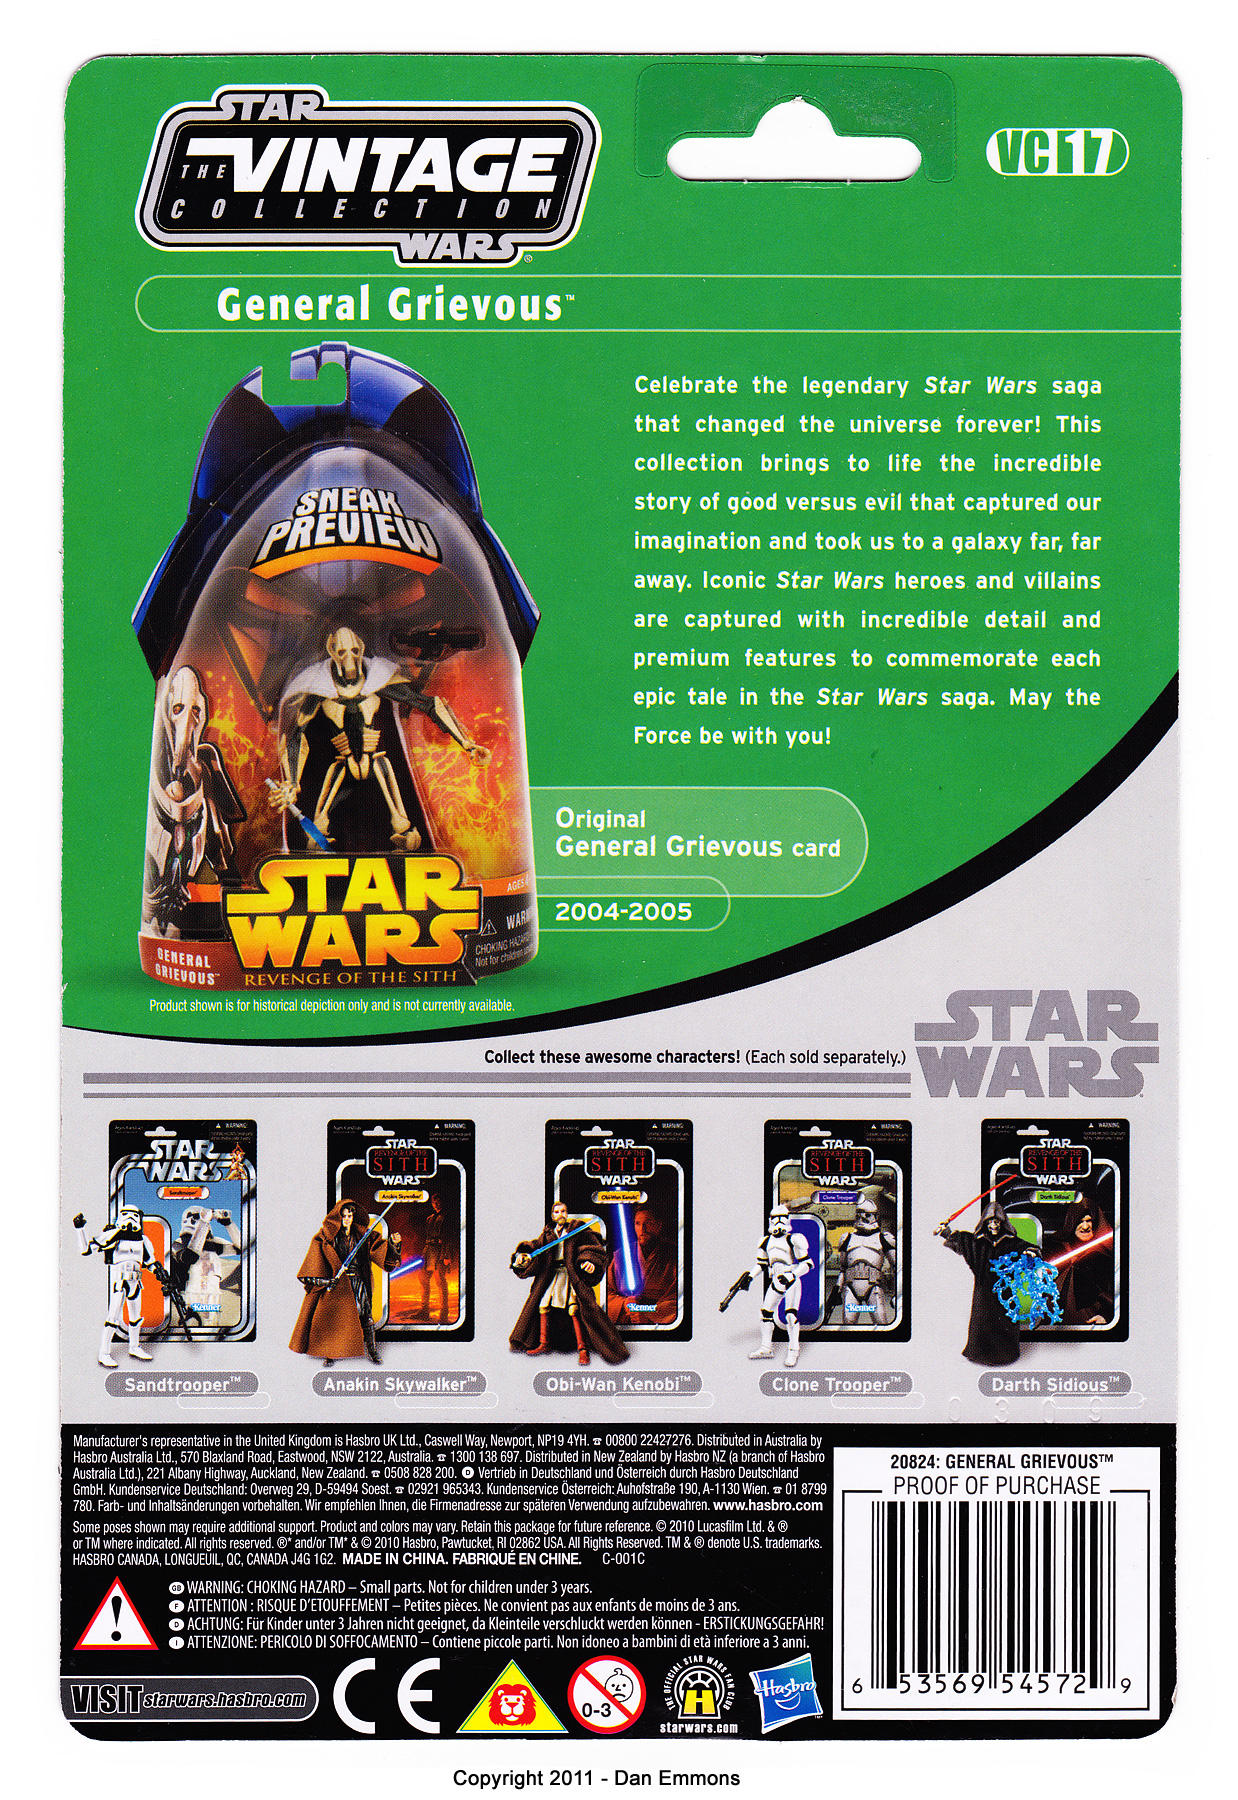 The Vintage Collection - VC17: General Grievous - Variation - Modern Card Front Images Shown On Back Of Card